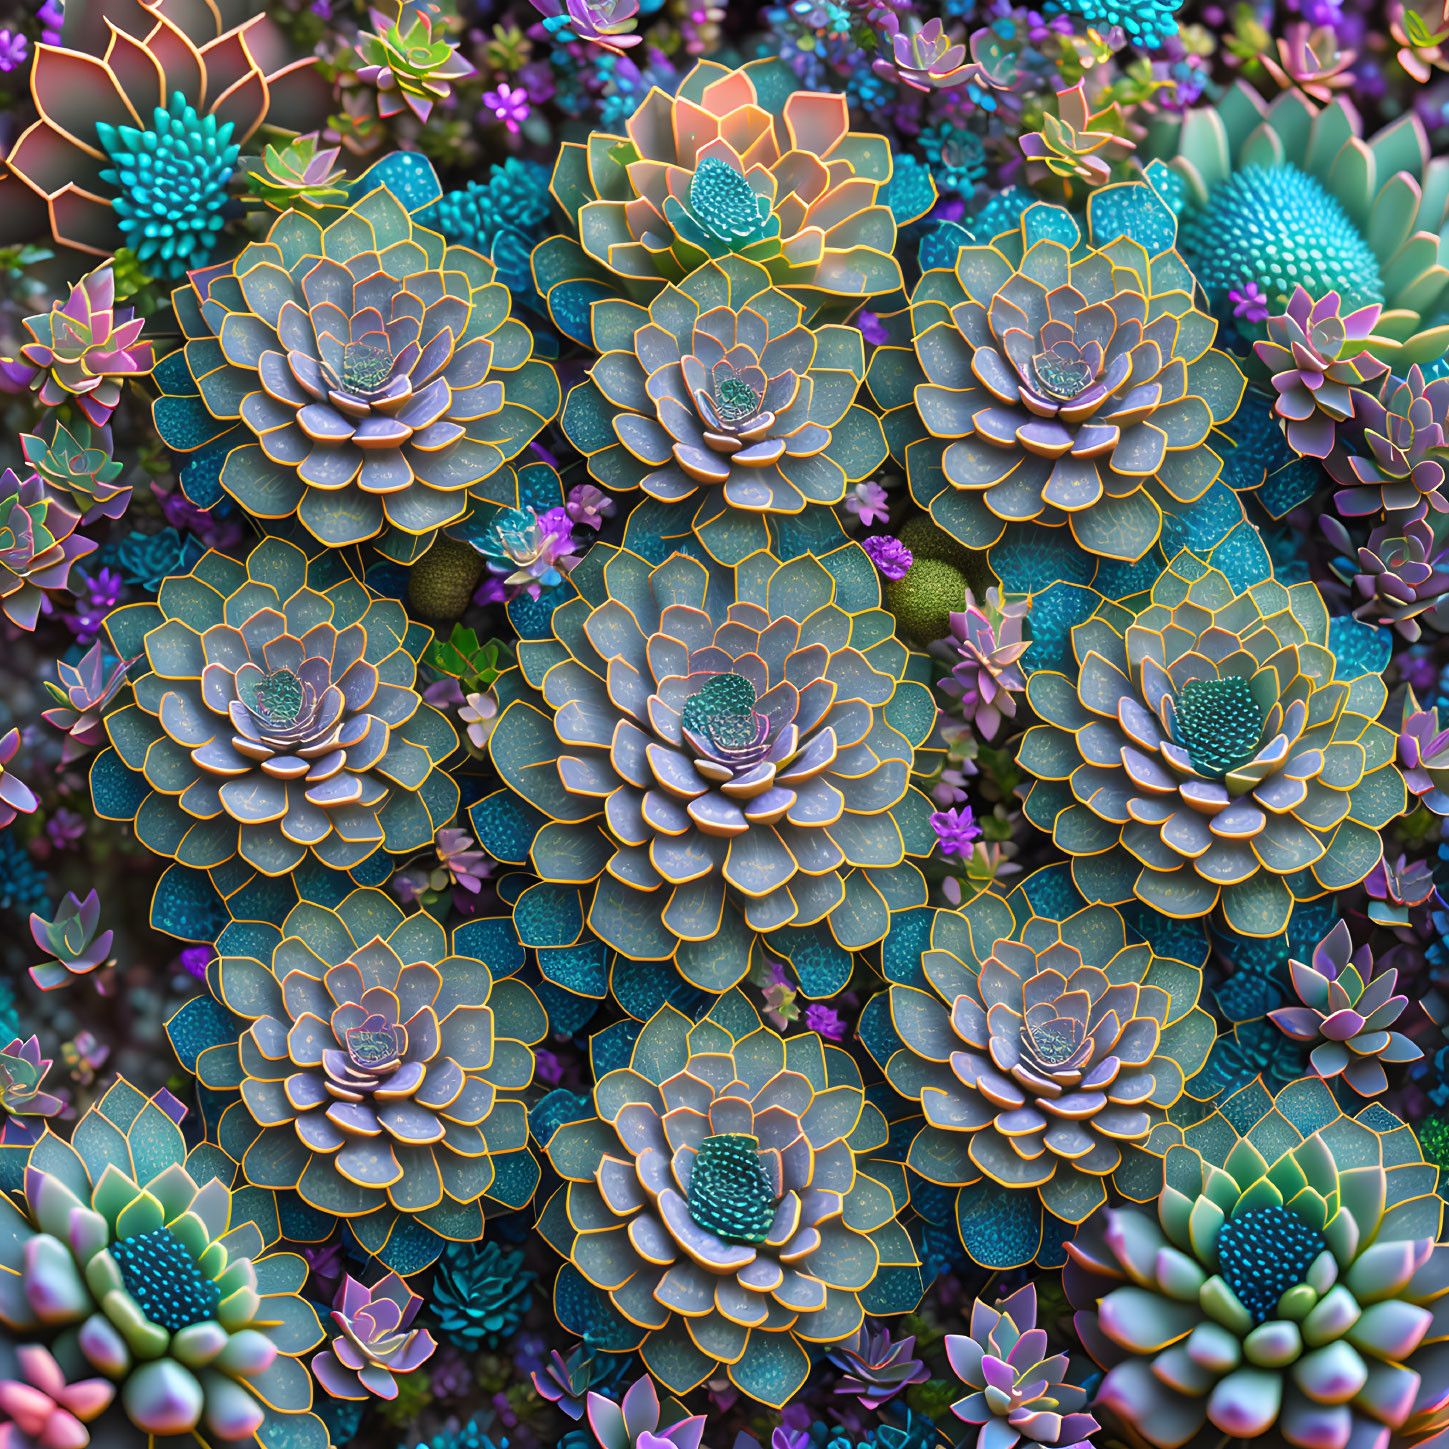 Colorful Succulent Plants: Shapes, Patterns, and Hues